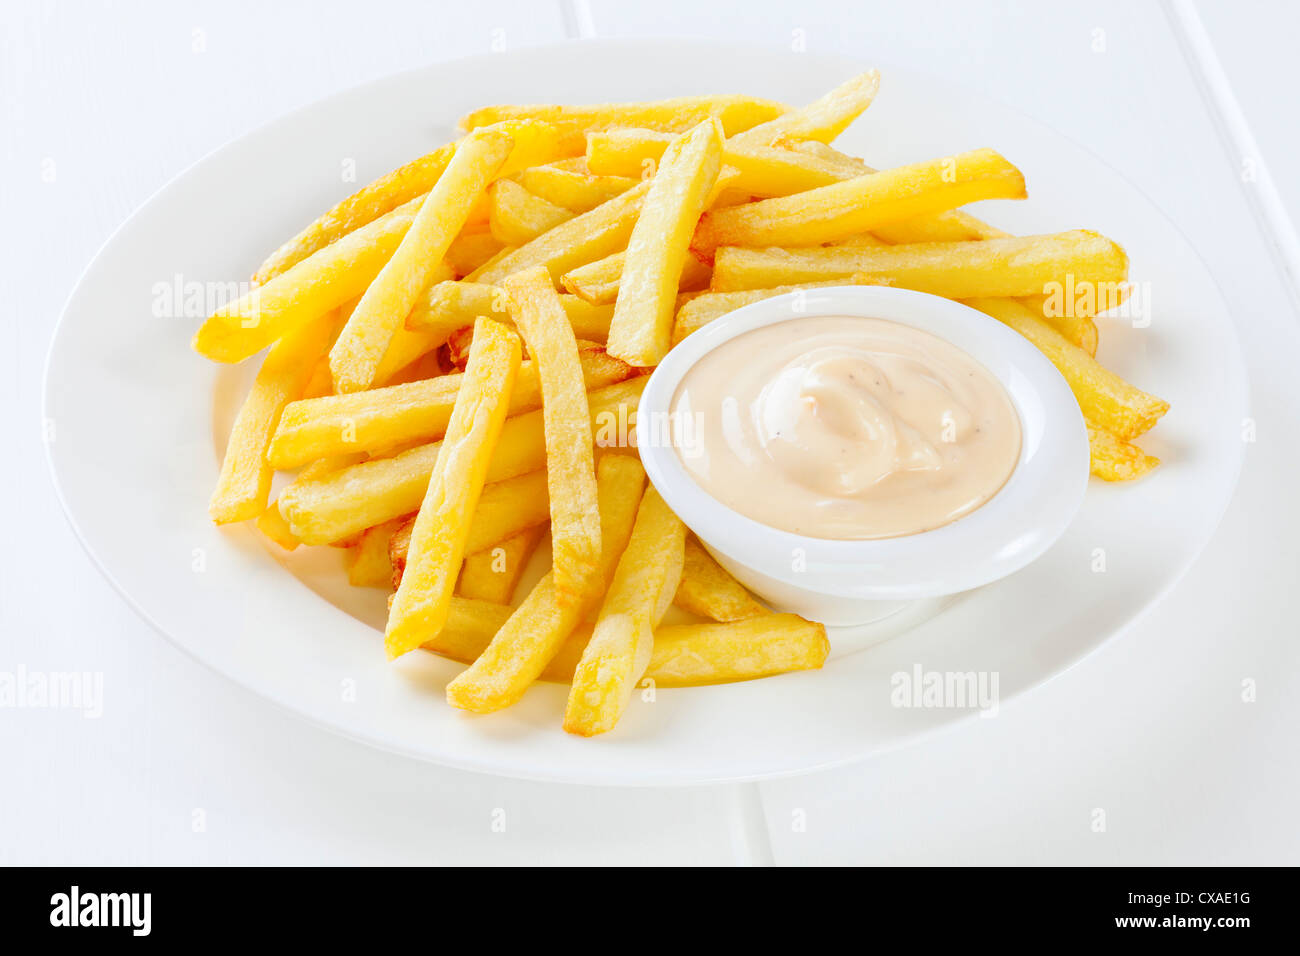 A plate of French Fries with Mayonnaise in a little bowl. Stock Photo